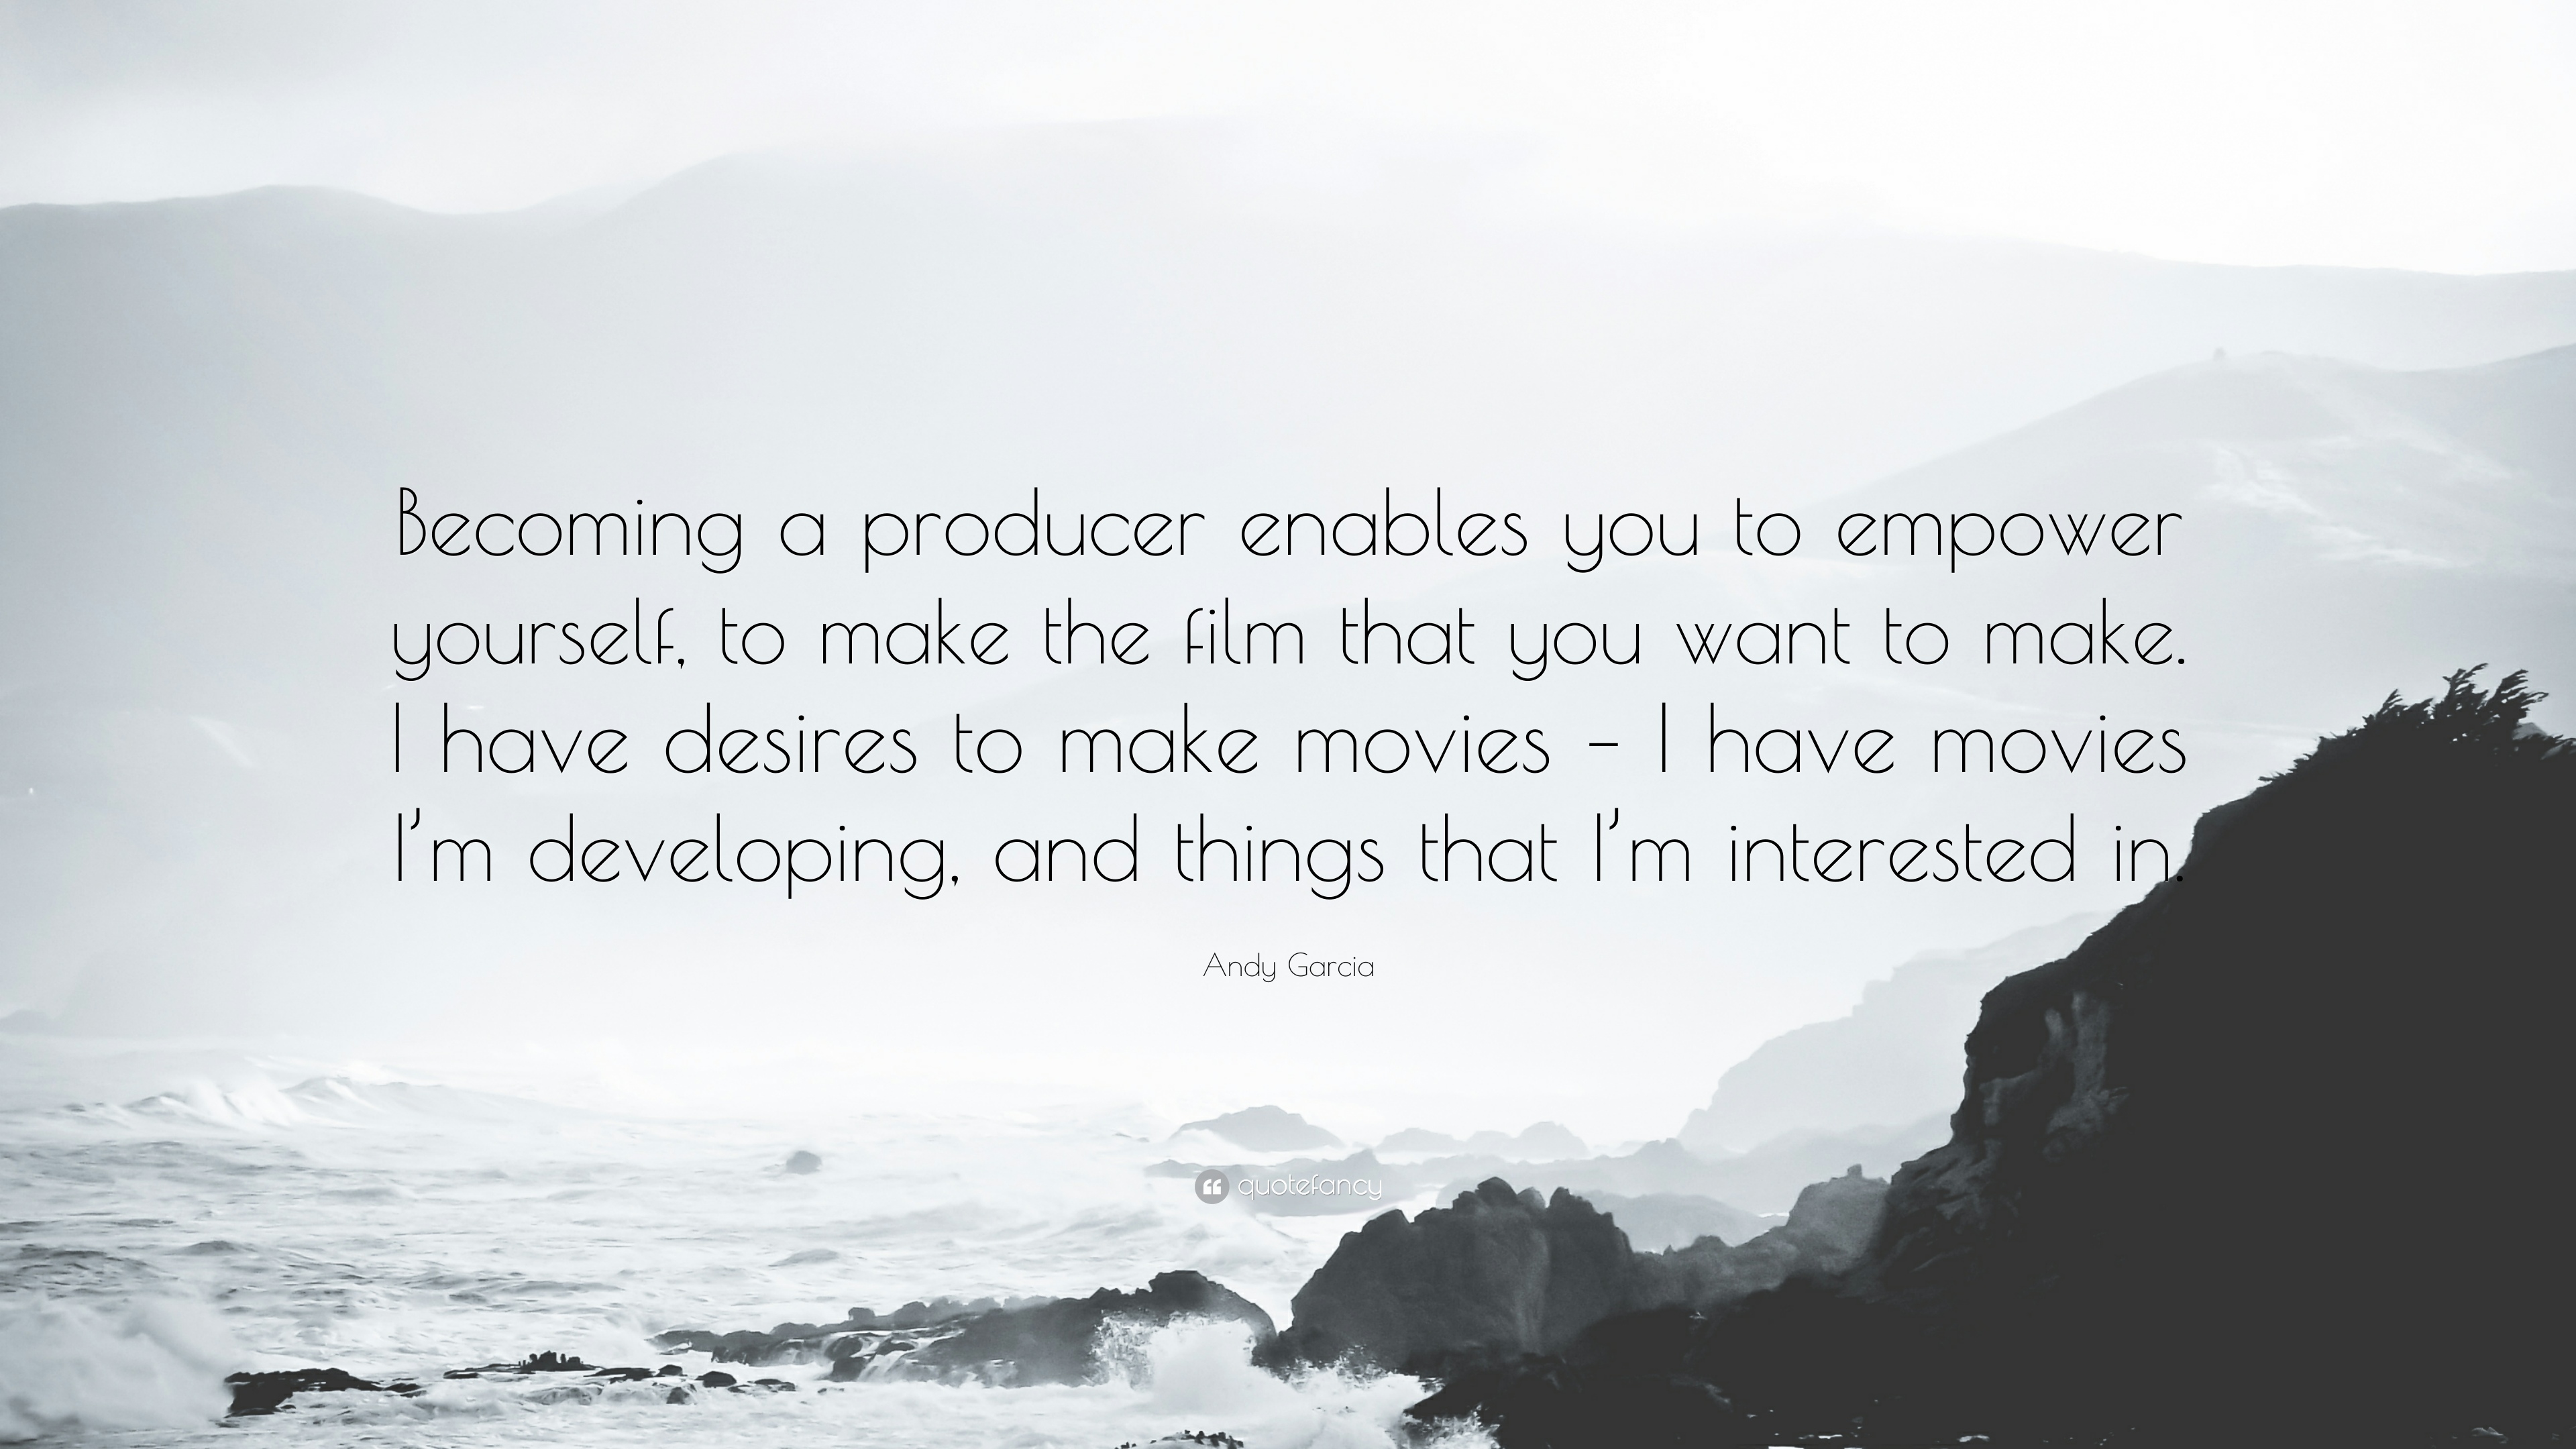 Andy Garcia Quote: “Becoming a producer enables you to empower